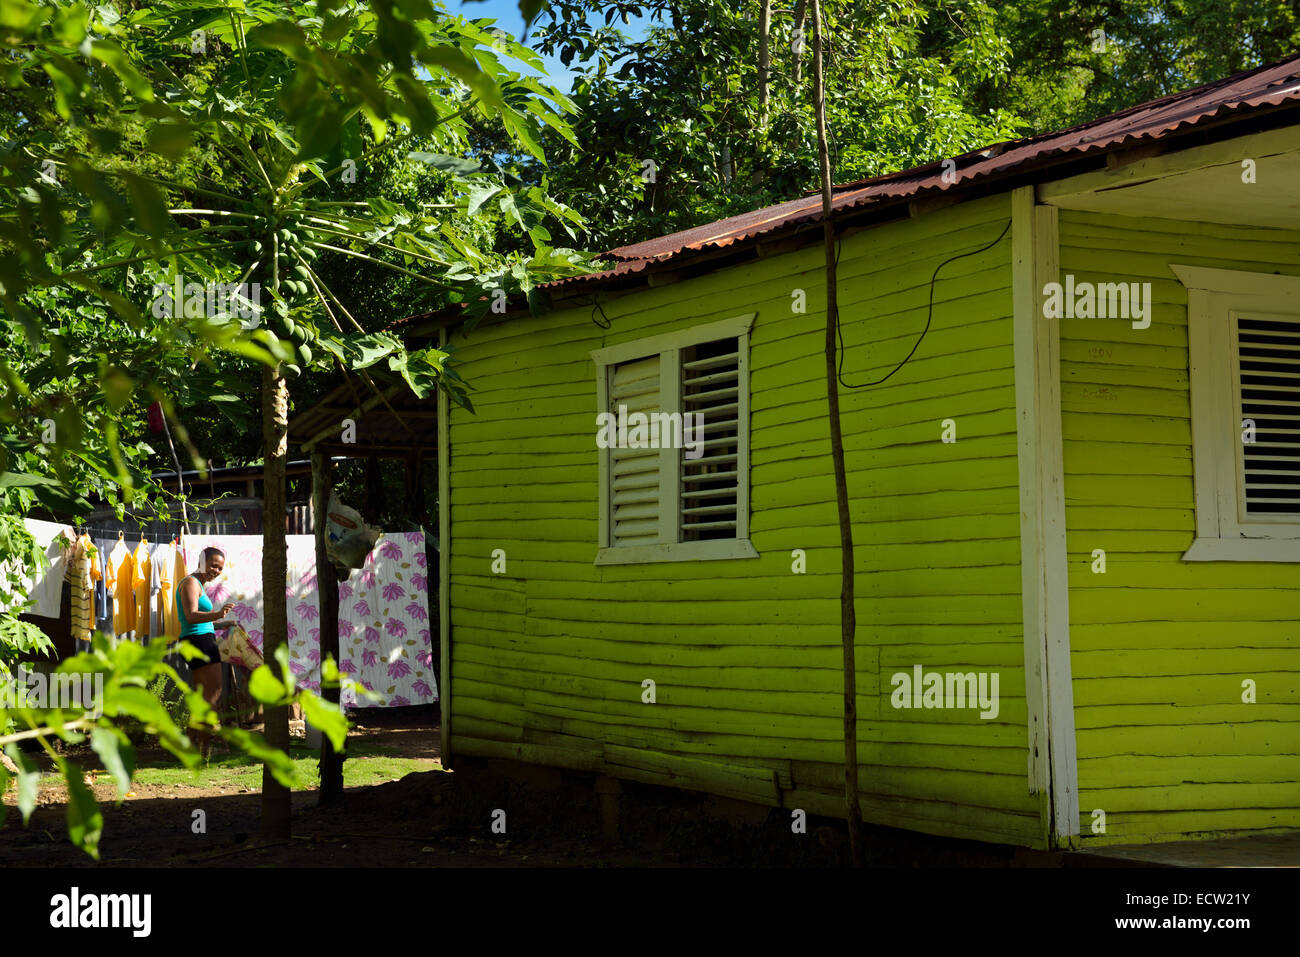 Laughing woman hanging out the clothes in the backyard of a green wood house Dominican Republic Stock Photo